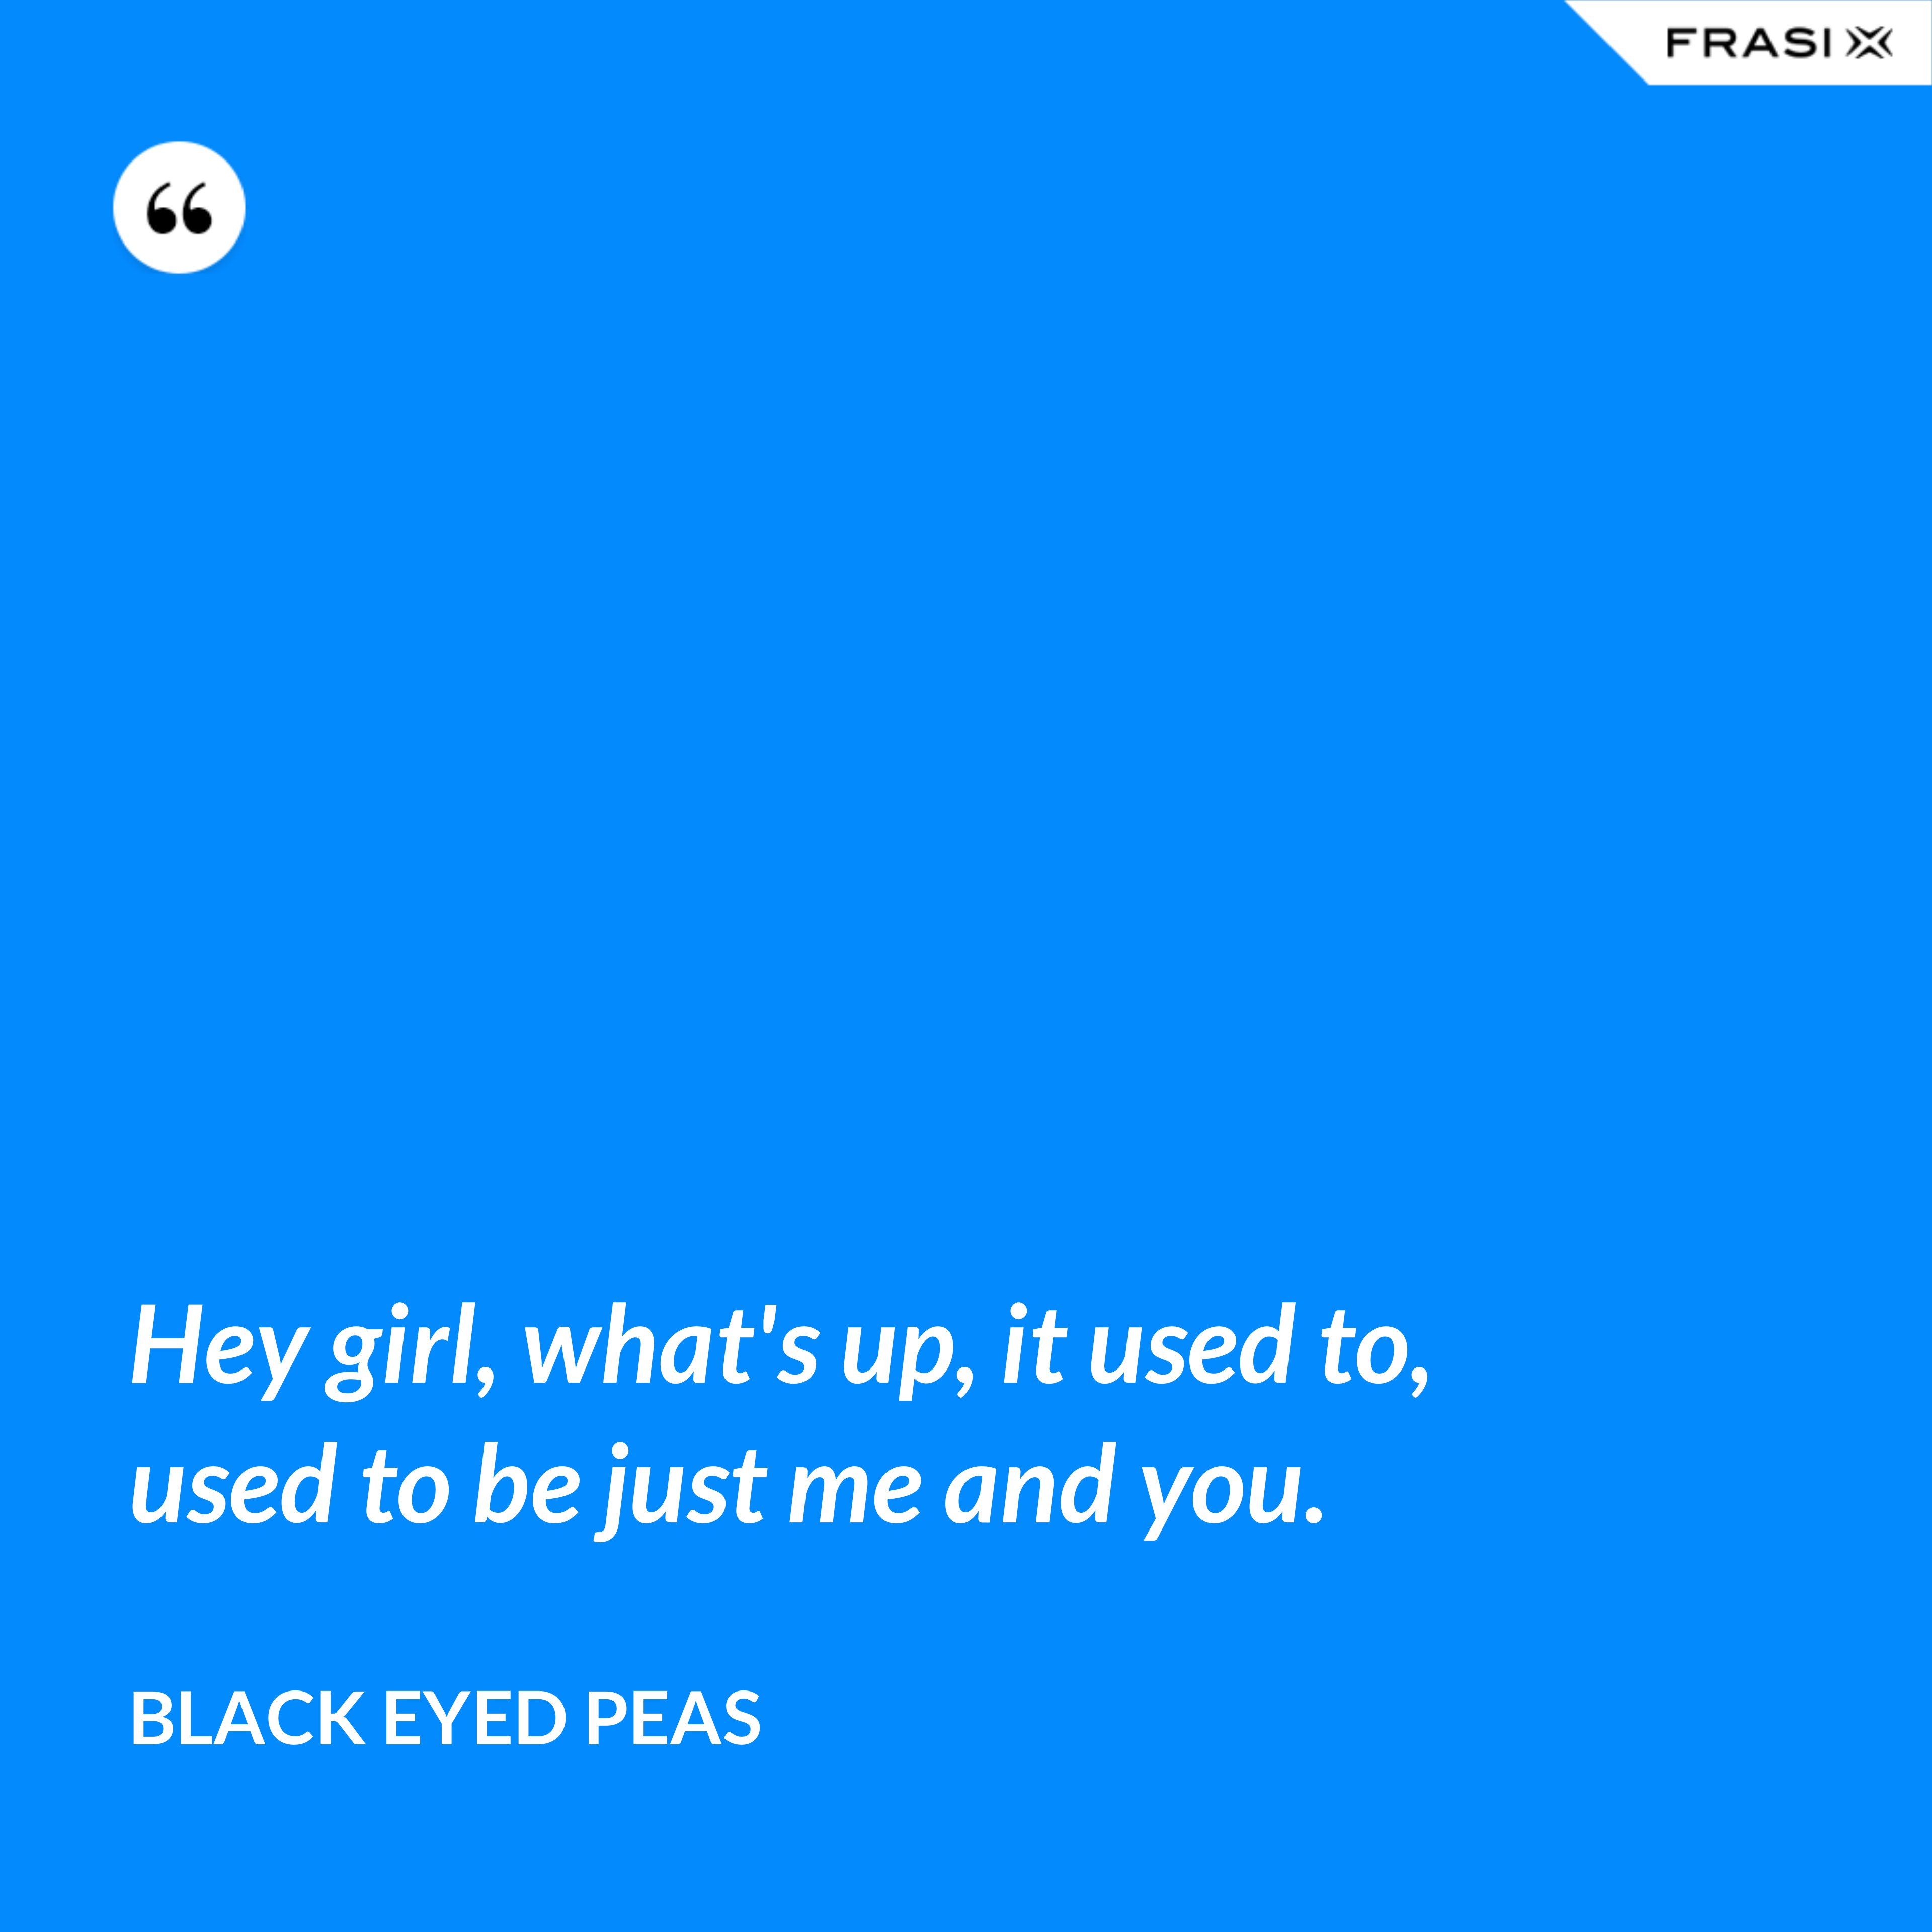 Hey girl, what's up, it used to, used to be just me and you. - Black Eyed Peas